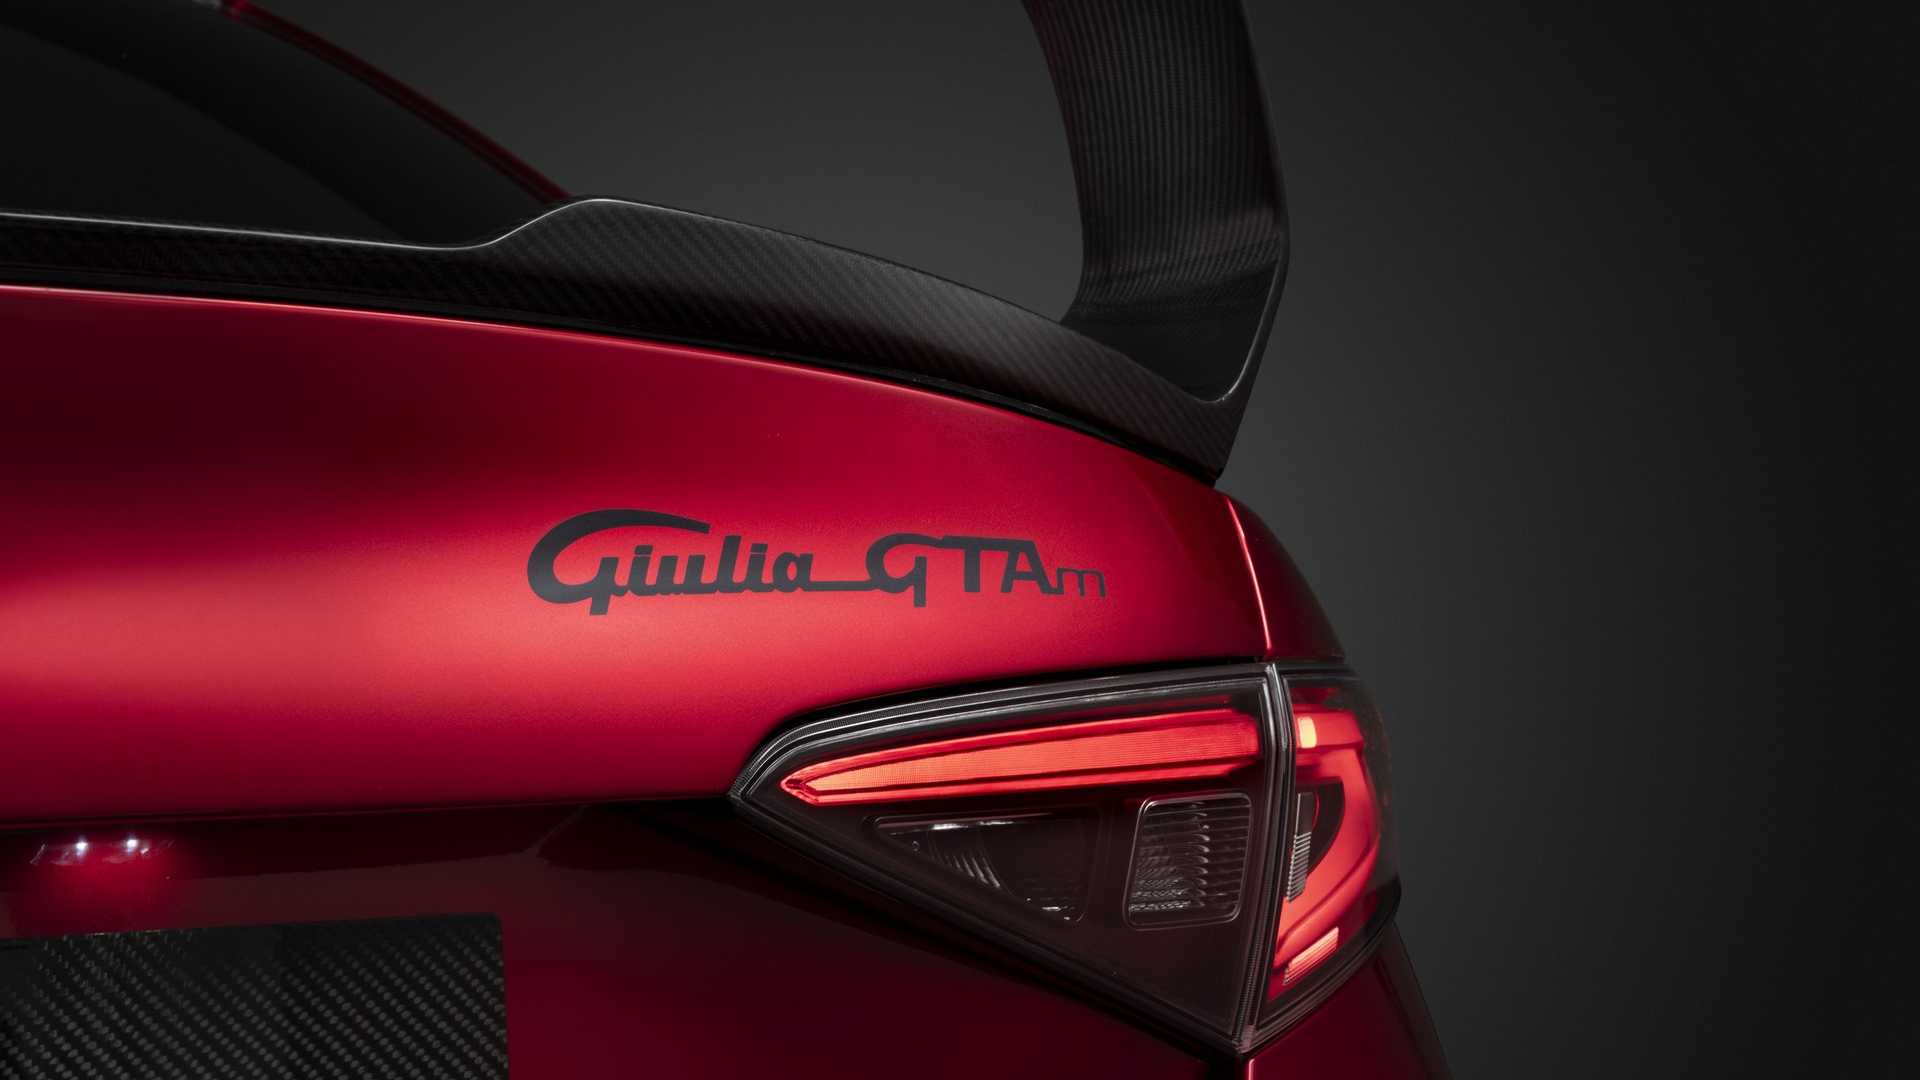 Badging on the back of the Giulia GTAm.